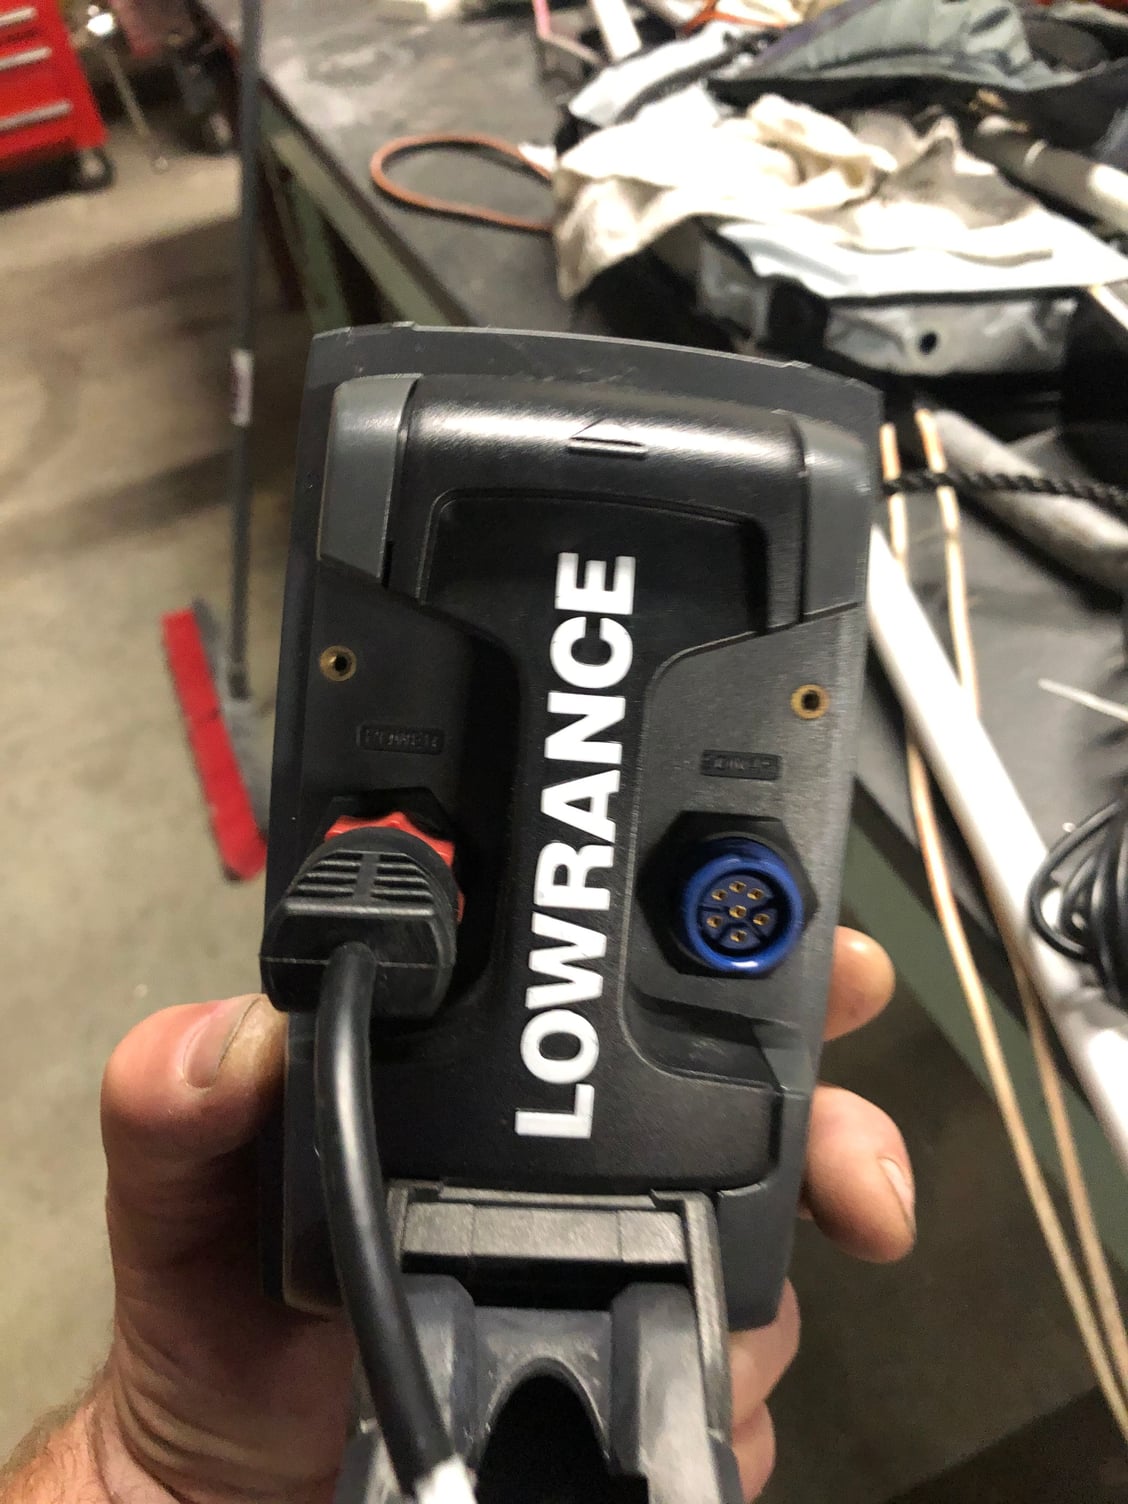 SOLD Lowrance Hook 4 chirp gps fish finder SOLD - The Hull Truth - Boating  and Fishing Forum